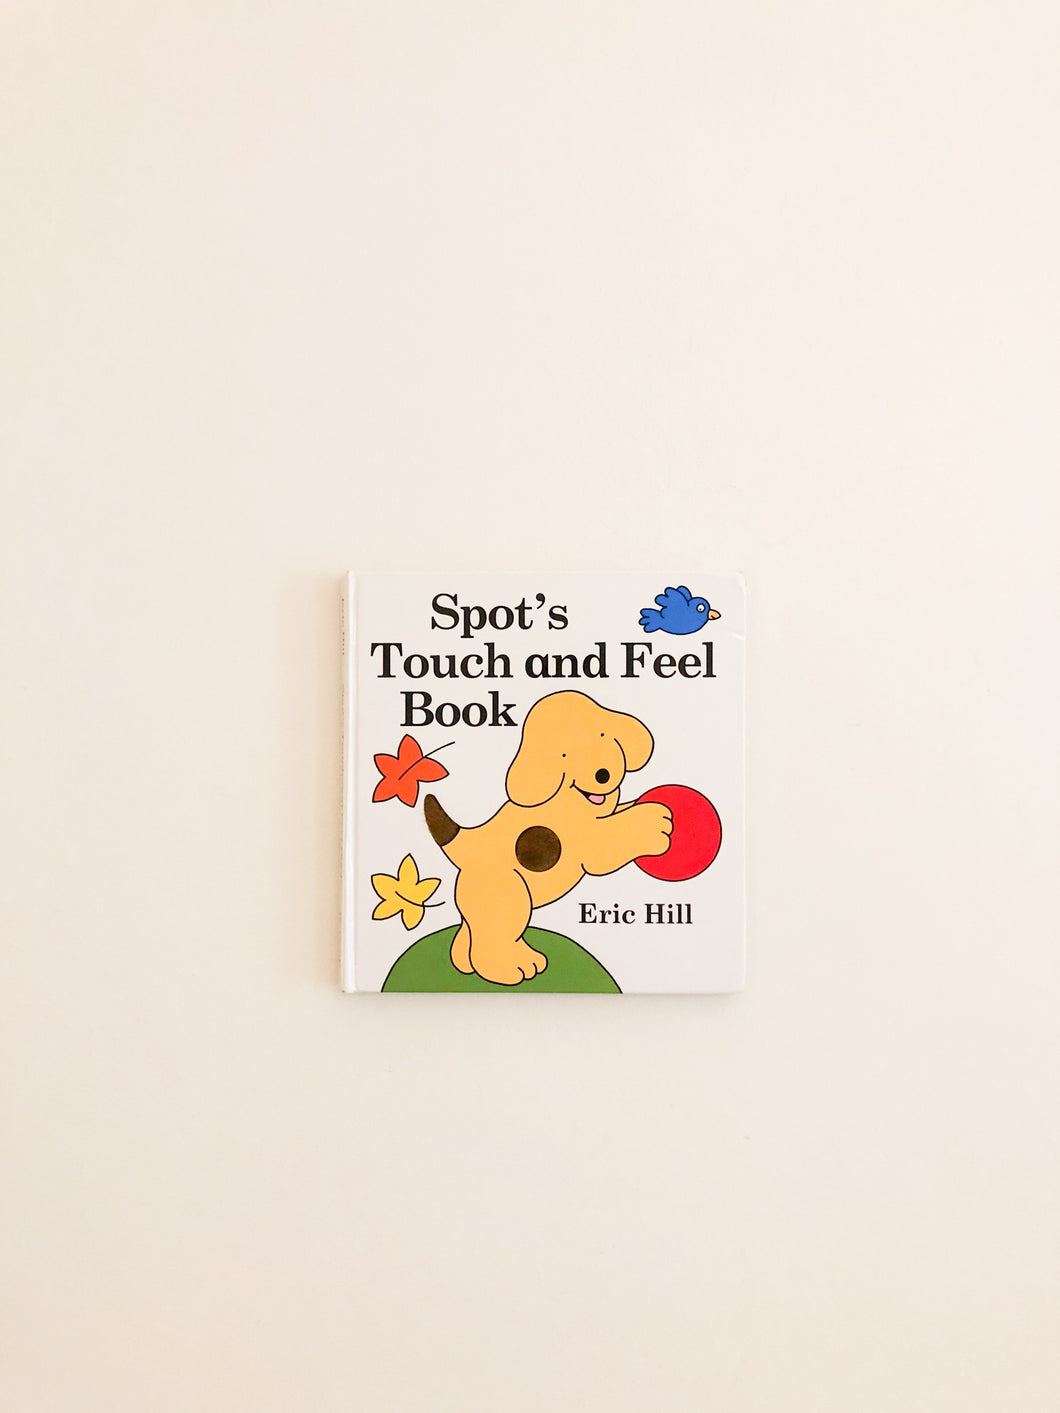 Spot's Touch and Feel Book